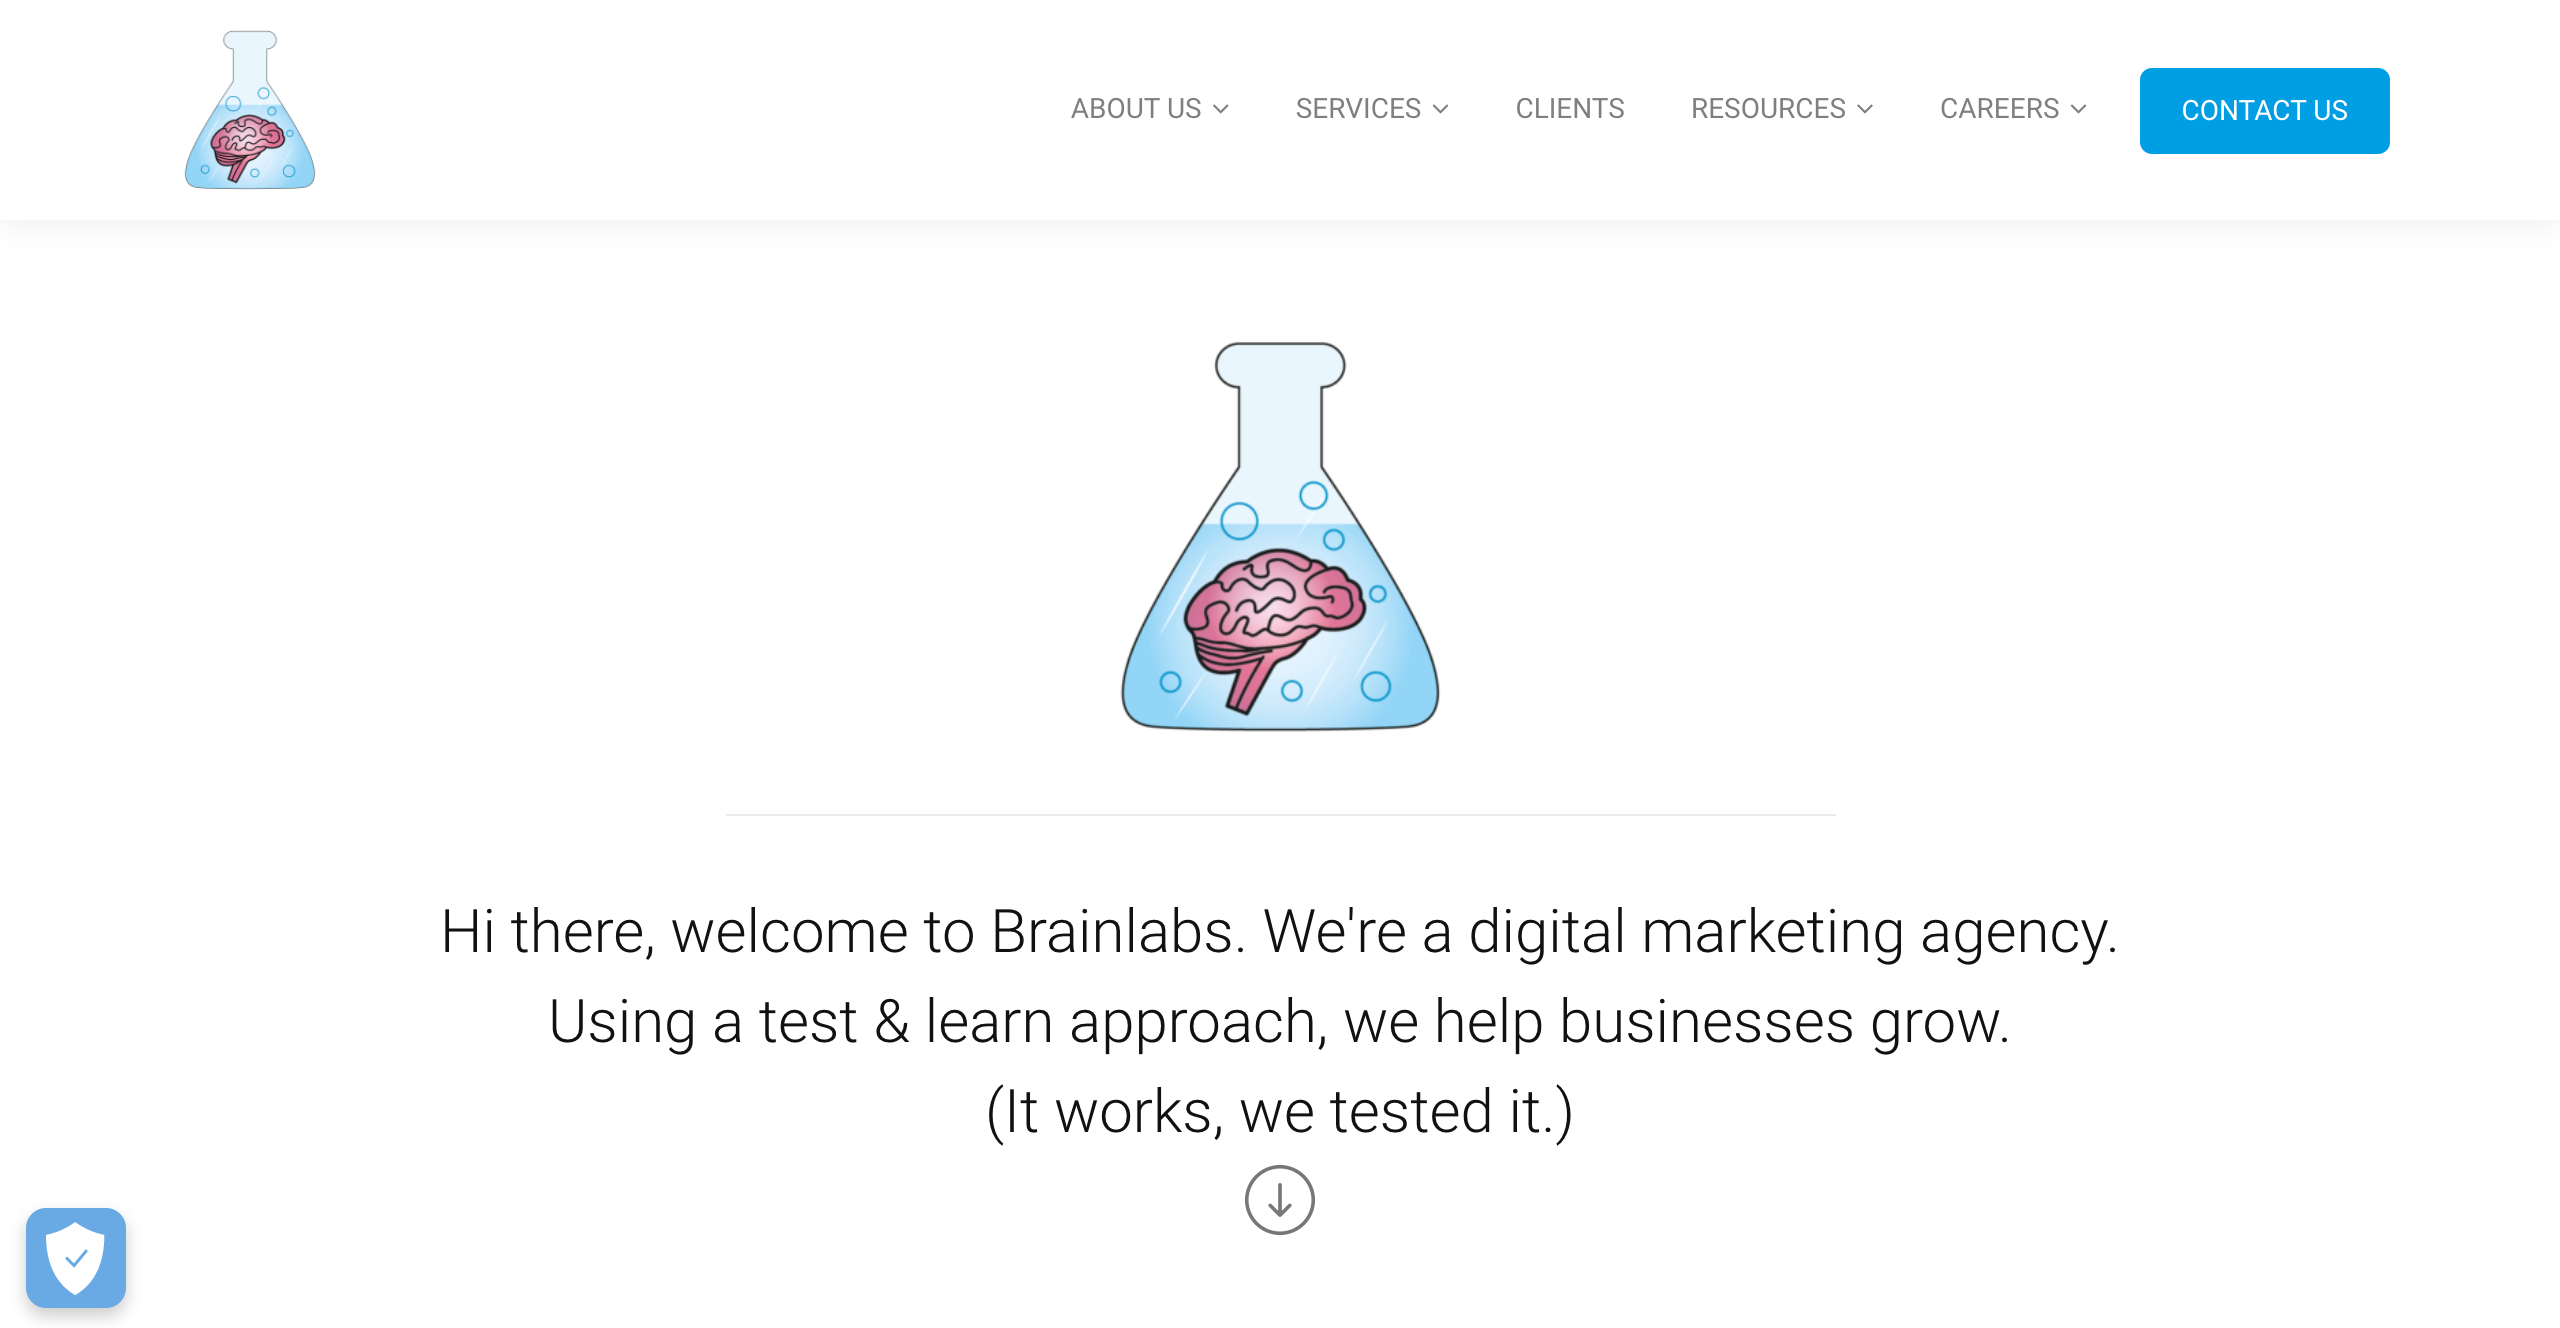 Brainlabs content marketing agency